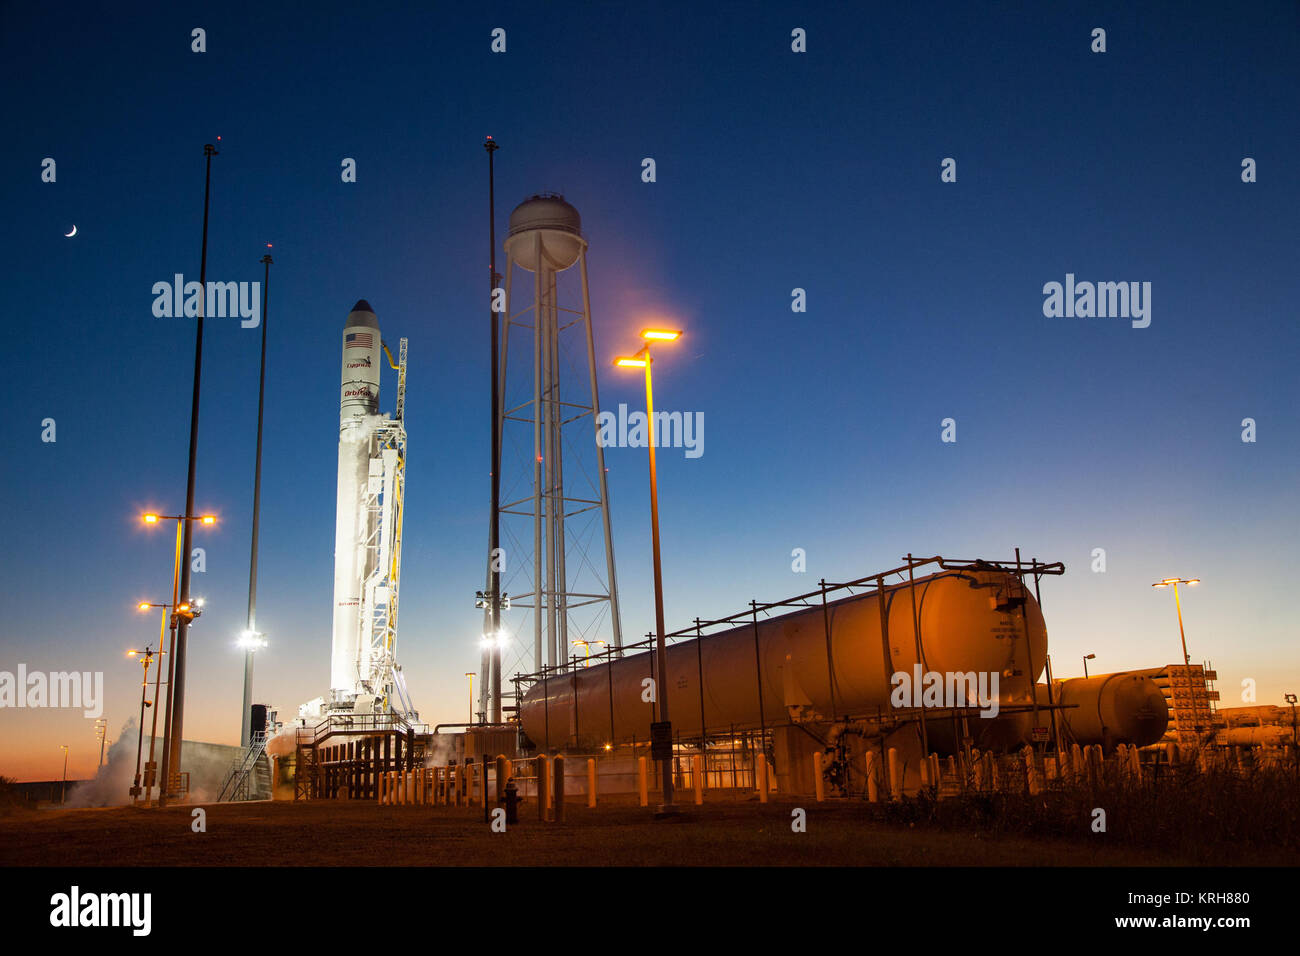 The Orbital Sciences Corporation Antares rocket, with the Cygnus spacecraft onboard, is seen on launch Pad-0A after the launch attempt was scrubbed because of a boat down range in the trajectory Antares would have flown had it lifted off, Monday, Oct. 27, 2014, at NASA's Wallops Flight Facility in Virginia. The Antares will launch with the Cygnus spacecraft filled with over 5,000 pounds of supplies for the International Space Station, including science experiments, experiment hardware, spare parts, and crew provisions. The Orbital-3 mission is Orbital Sciences' third contracted cargo delivery  Stock Photo